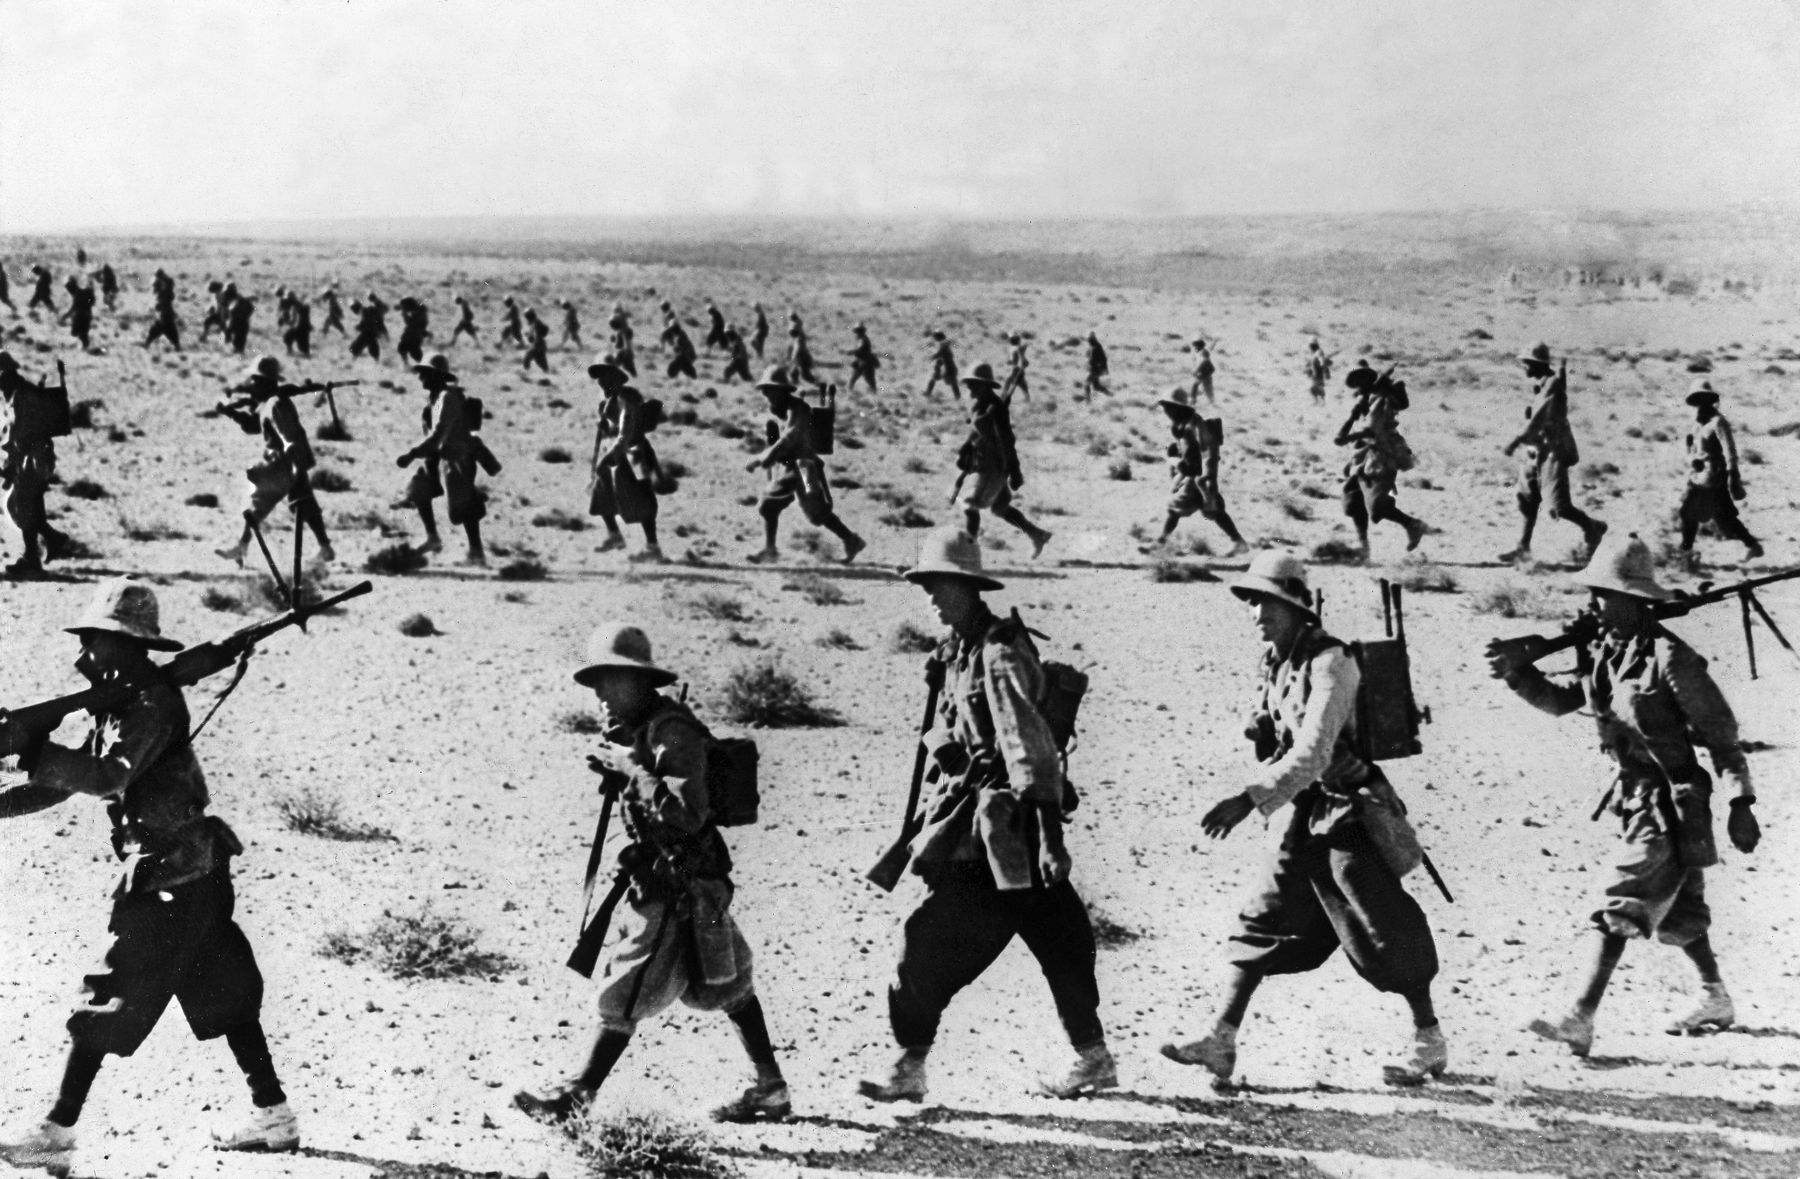 Advancing across the Egyptian frontier in September 1940, Italian troops were anticipating easy victories against the relatively small number of British and Commonwealth troops that opposed them. 